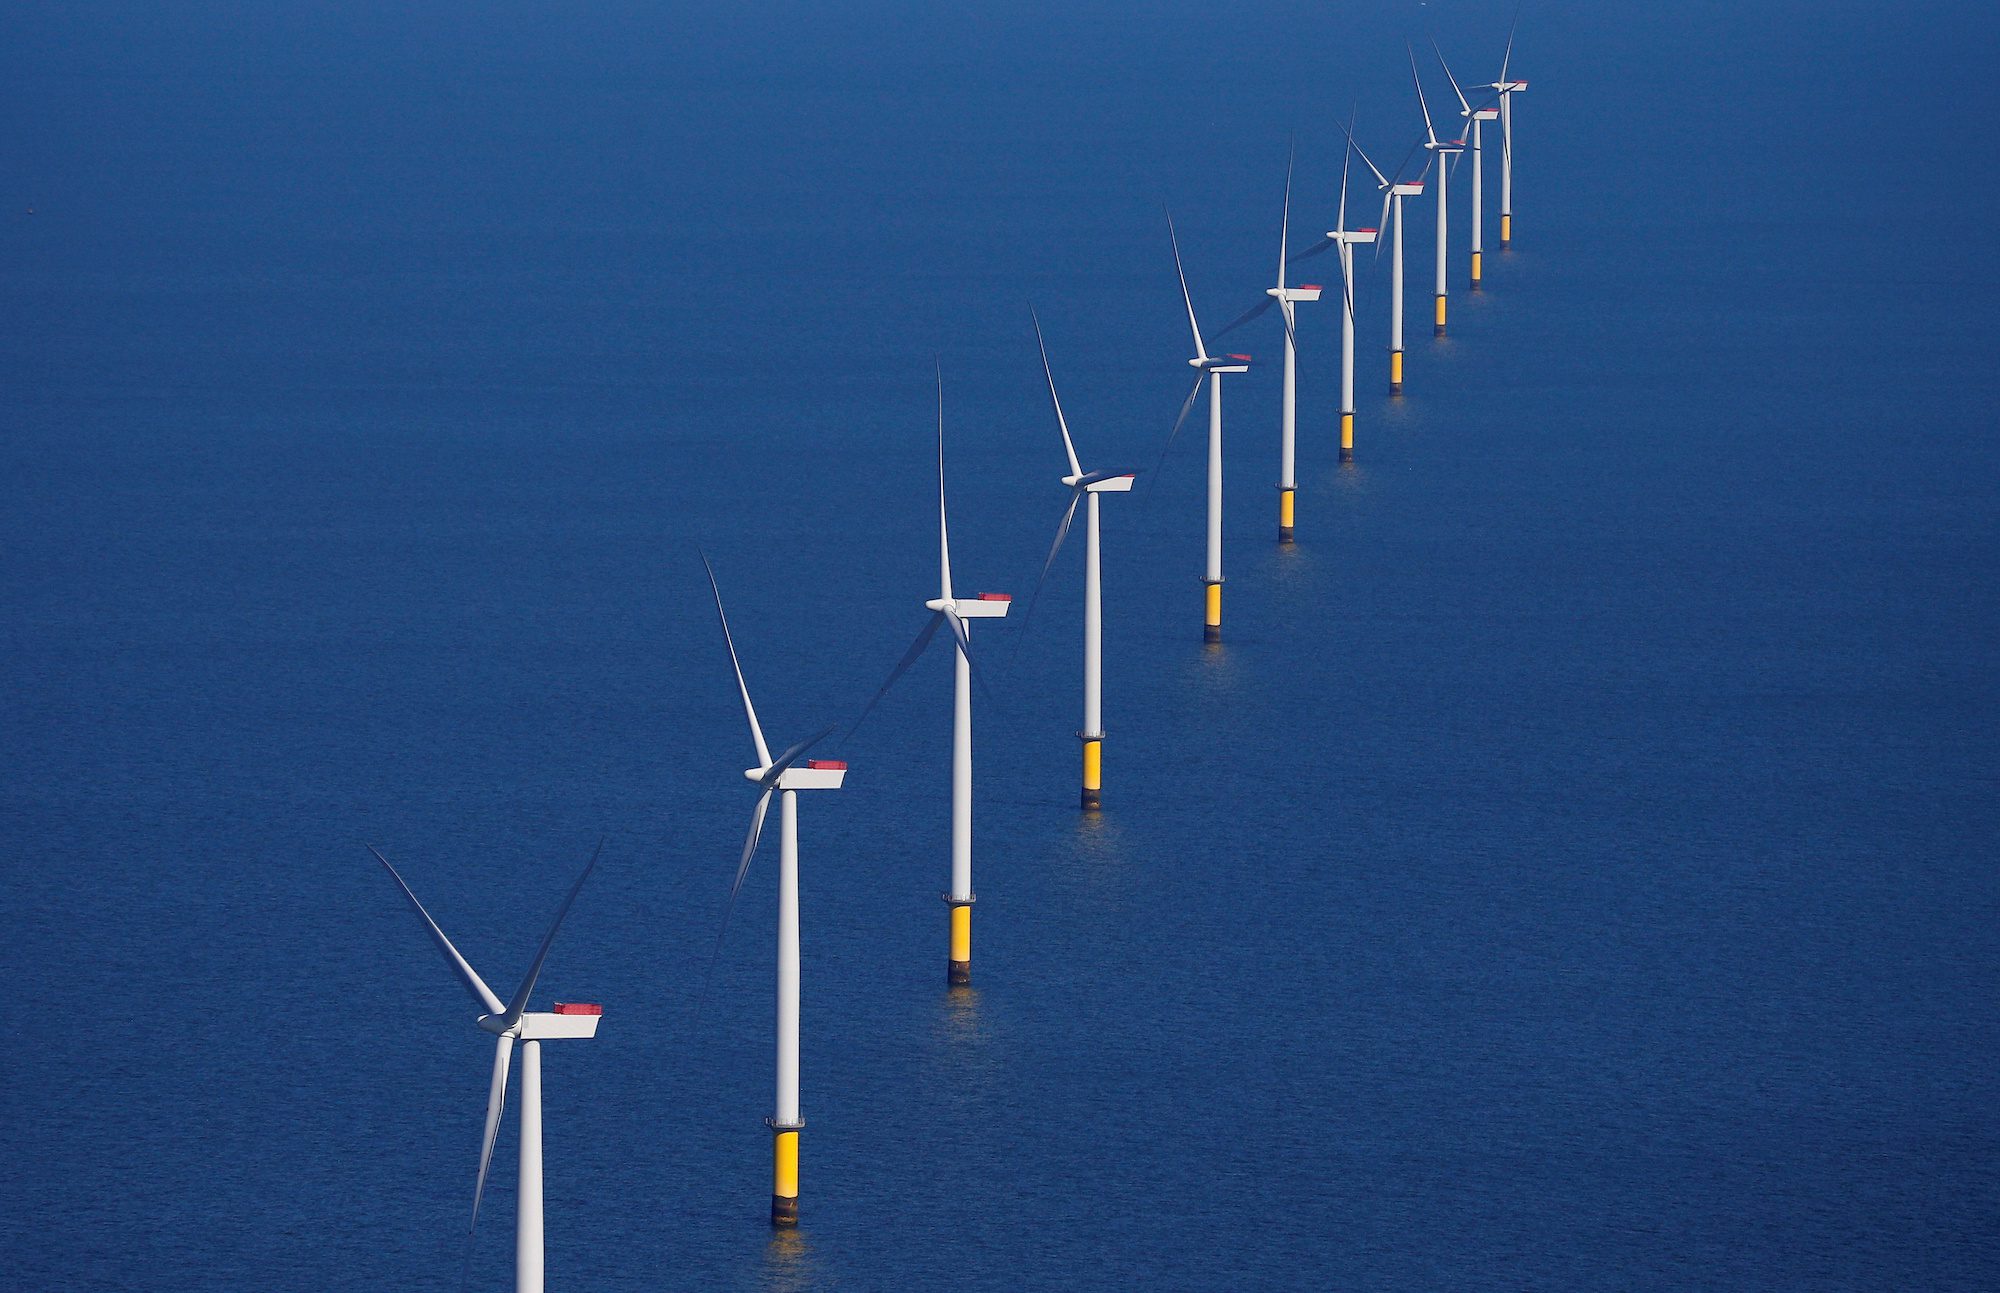 Wind Power Giant’s Profit Hit by Rocks on the Seabed